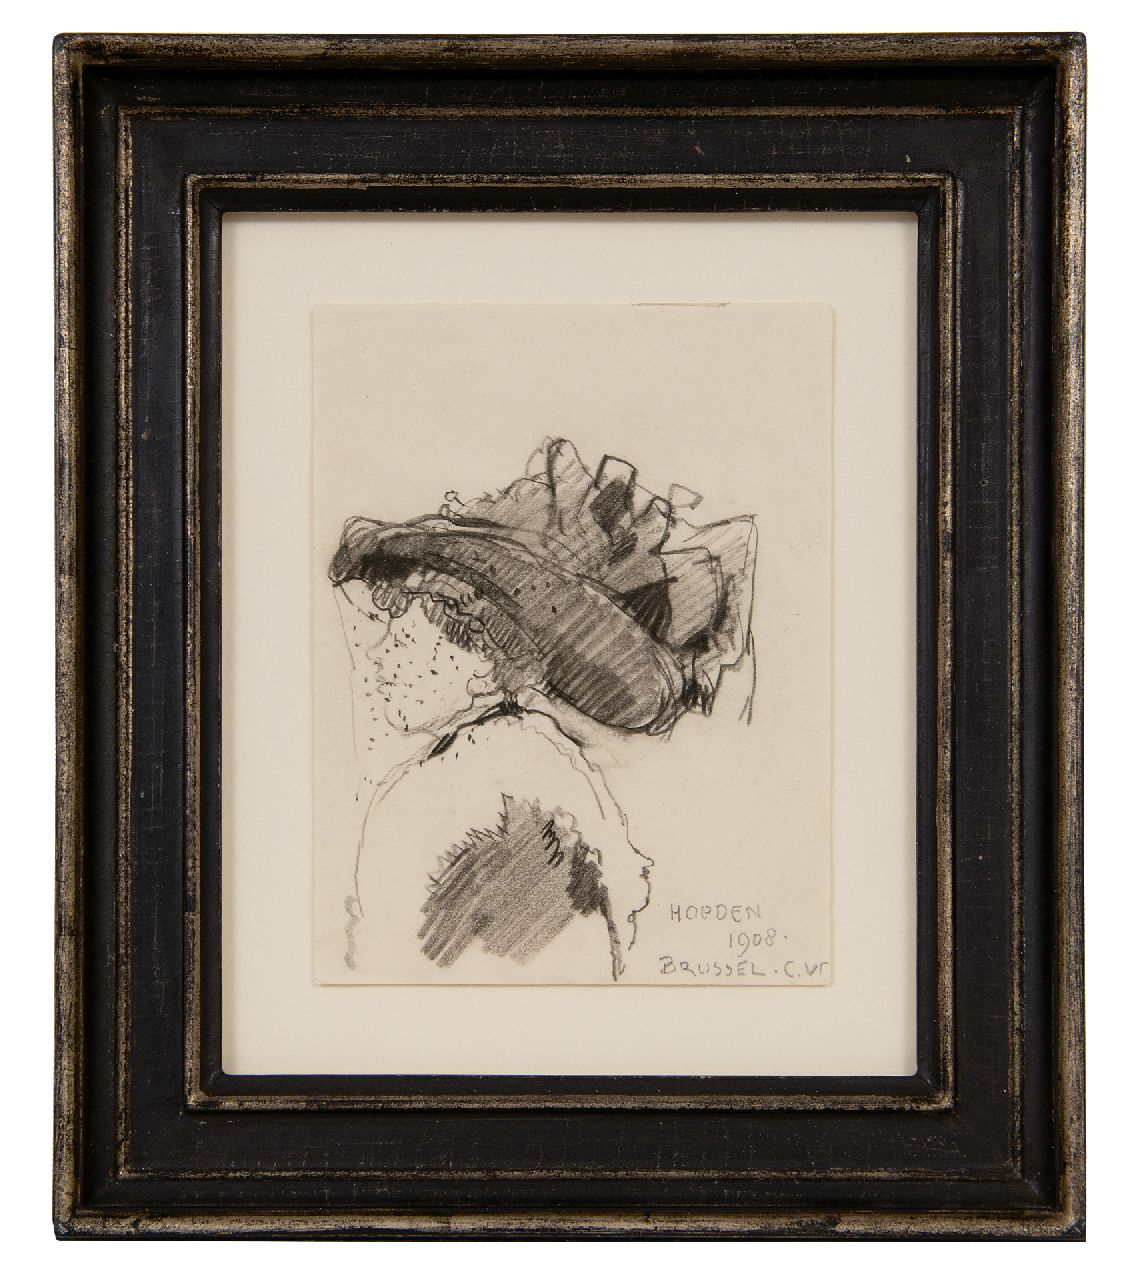 Vreedenburgh C.  | Cornelis Vreedenburgh | Watercolours and drawings offered for sale | The latest hat fashion in Brussels, 1908, black chalk on paper 13.2 x 10.2 cm, signed l.r. with initials and dated 1908